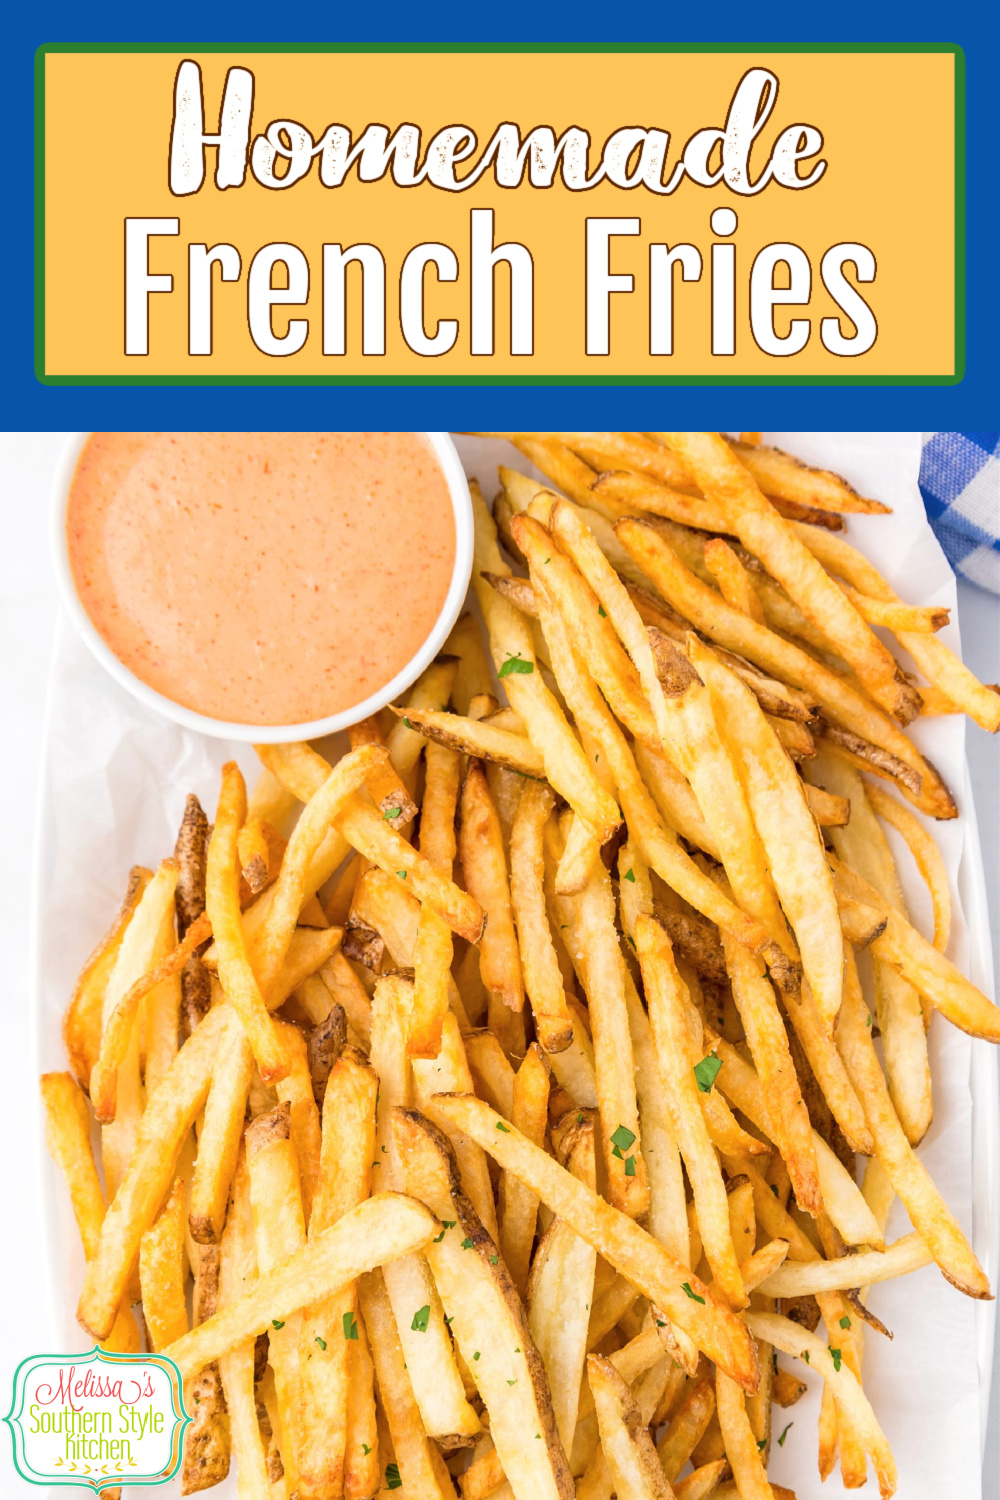 Homemade French Fries are a can't-miss side dish you can make at home. #frenchfries #homemadefrenchfries #easyfrenchfries #frenchfriesrecipe #potatorecipes #potatoes #fries #russetpotatoes #russetpotatorecipes via @melissasssk